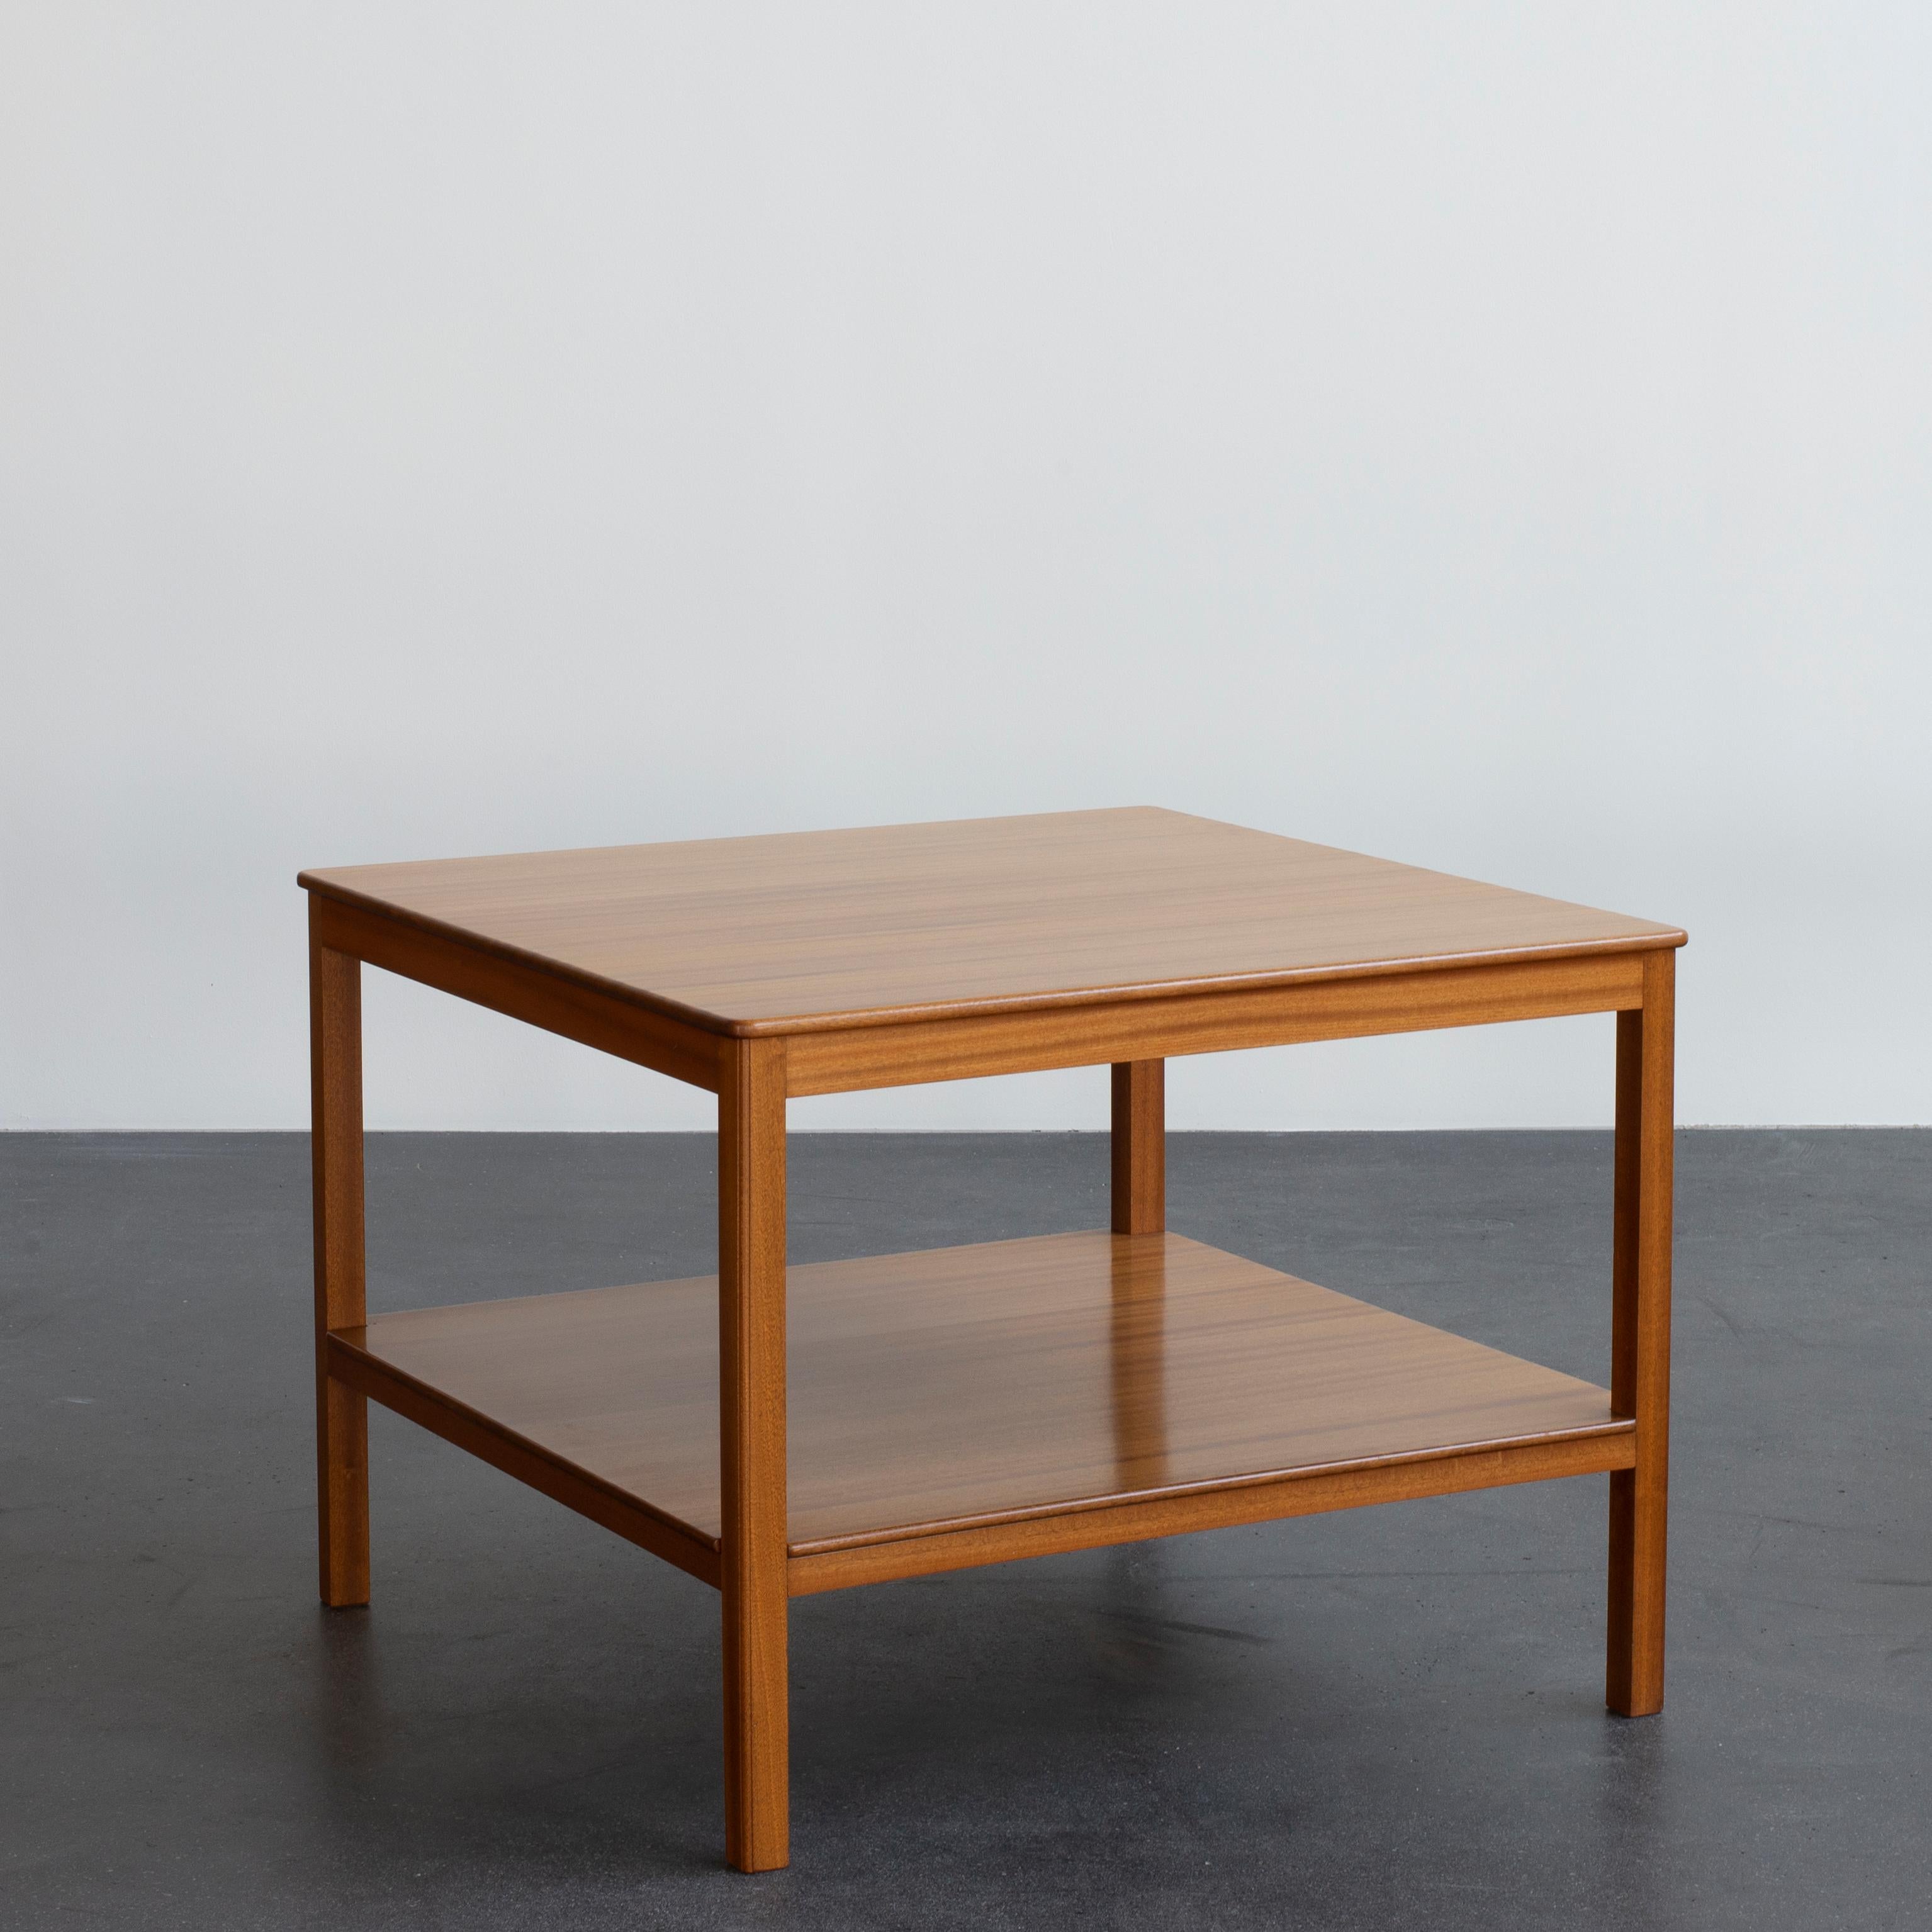 Kaare Klint coffee table in mahogany. Executed by Rud. Rasmussen.

Underside with manufacturer's paper label RUD. RASMUSSENS/SNEDKERIER/COPENHAGEN/DENMARK

Two tables available.